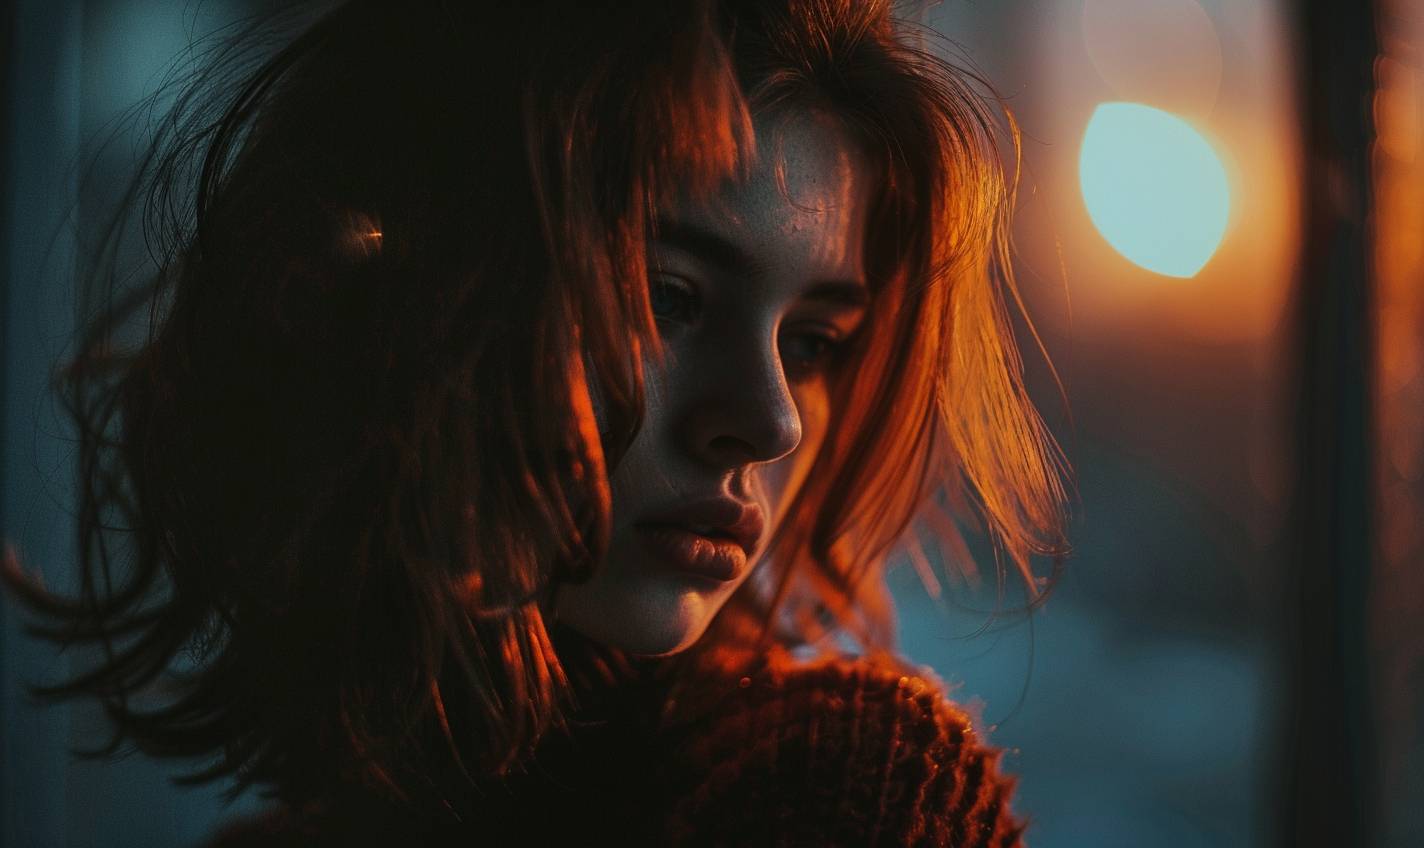 A [SUBJECT] against a dark background with a mysterious atmosphere and cool color tones, featuring soft side lighting in the portrait photography style with high contrast between light and shadow, glow effect, light leak, and bokeh.